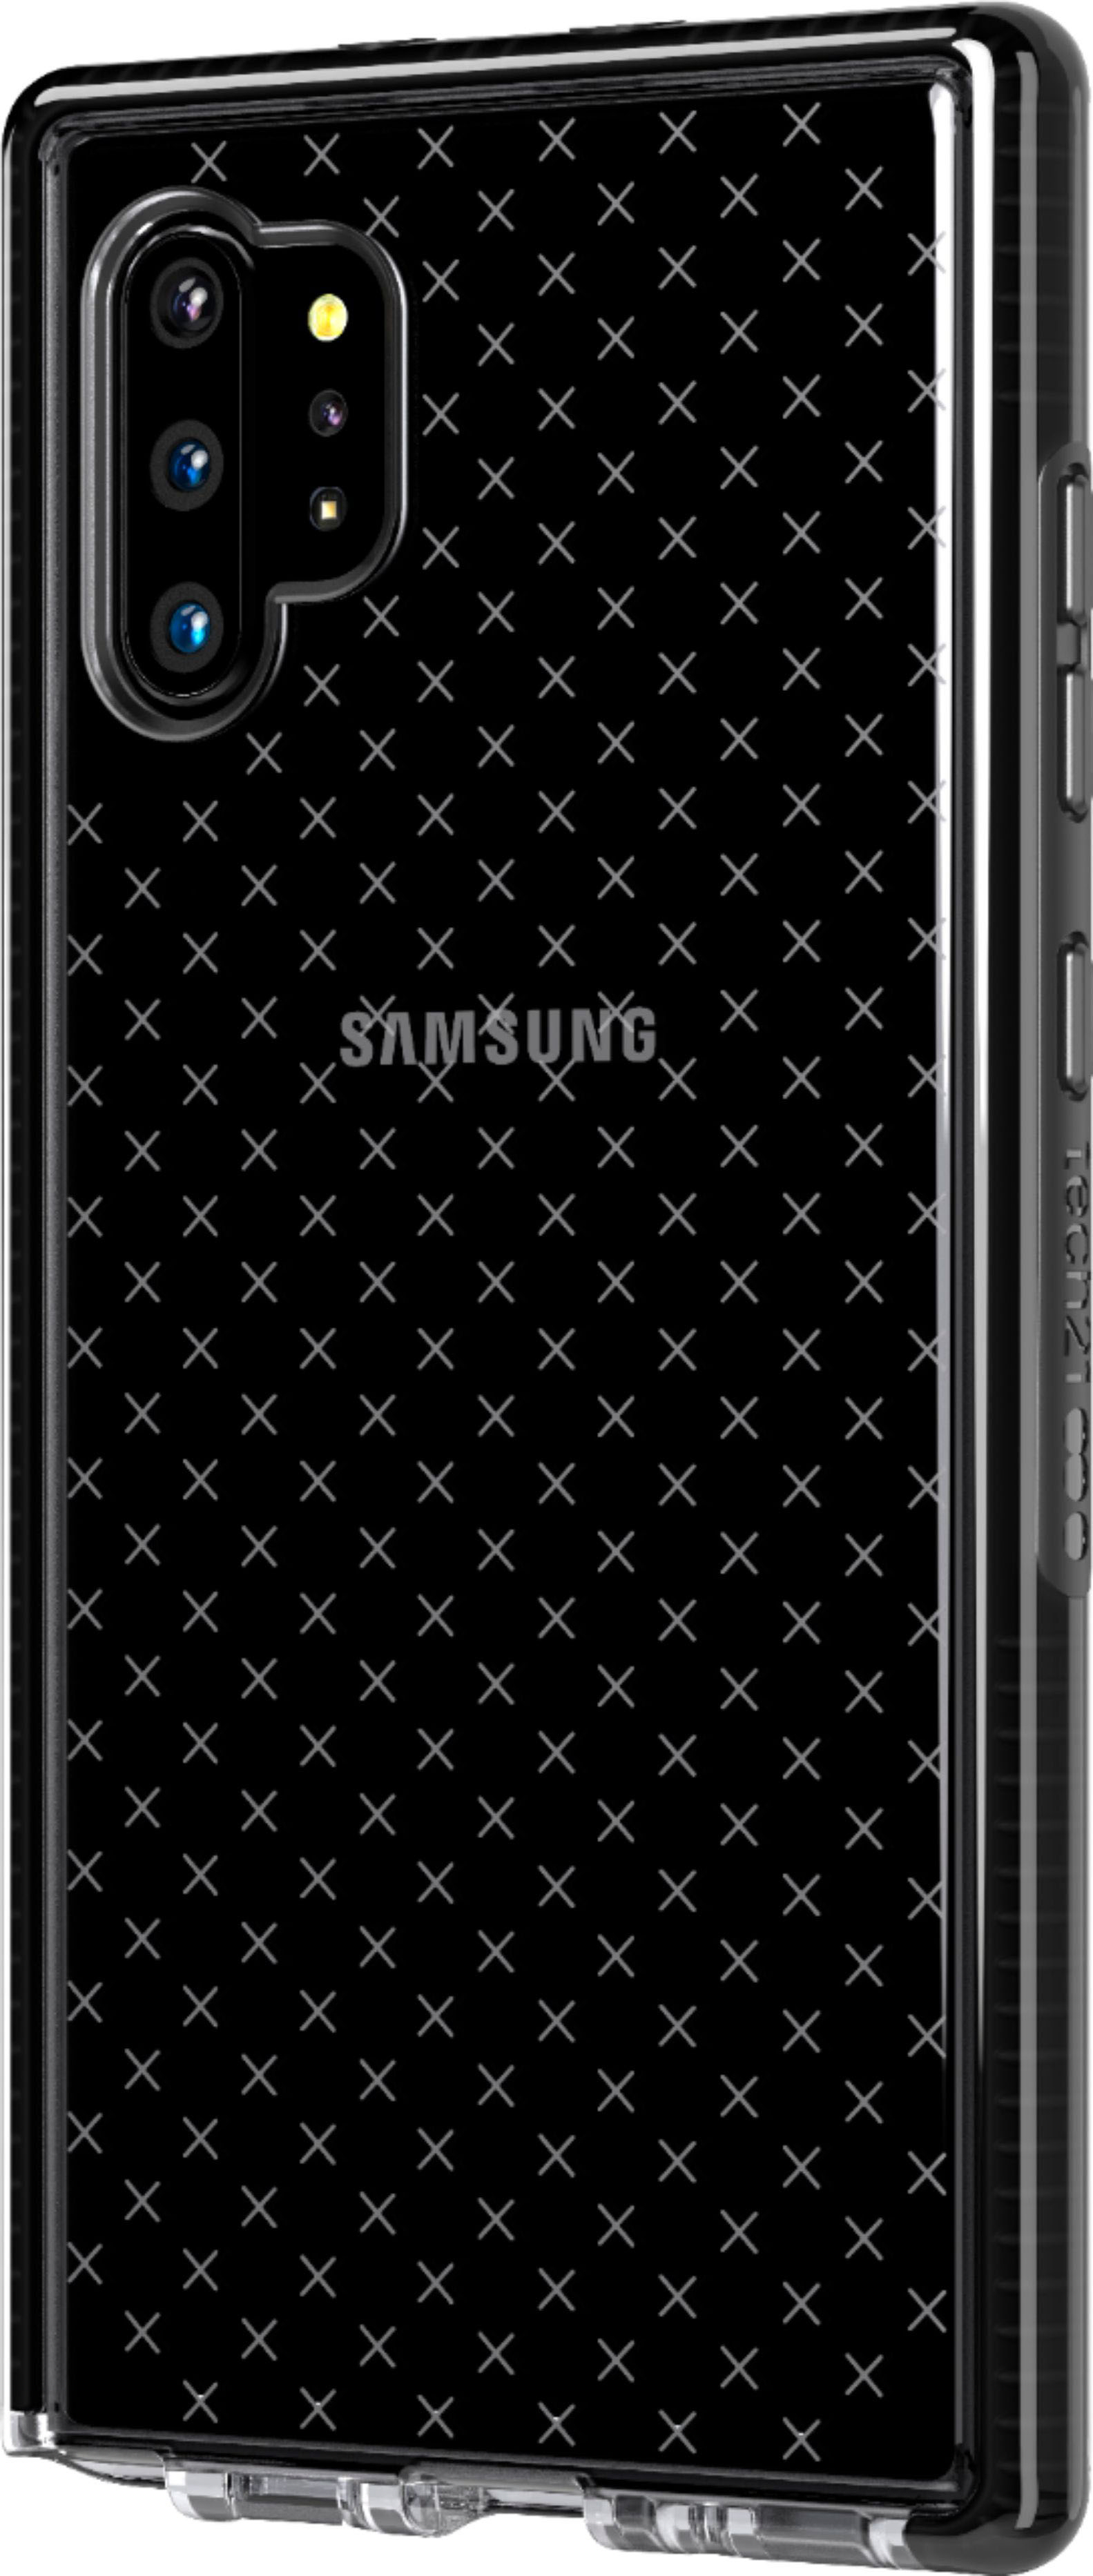 Tech21 - Evo Check Case for Samsung Galaxy Note10+ and Note10+ 5G - Smoky Black